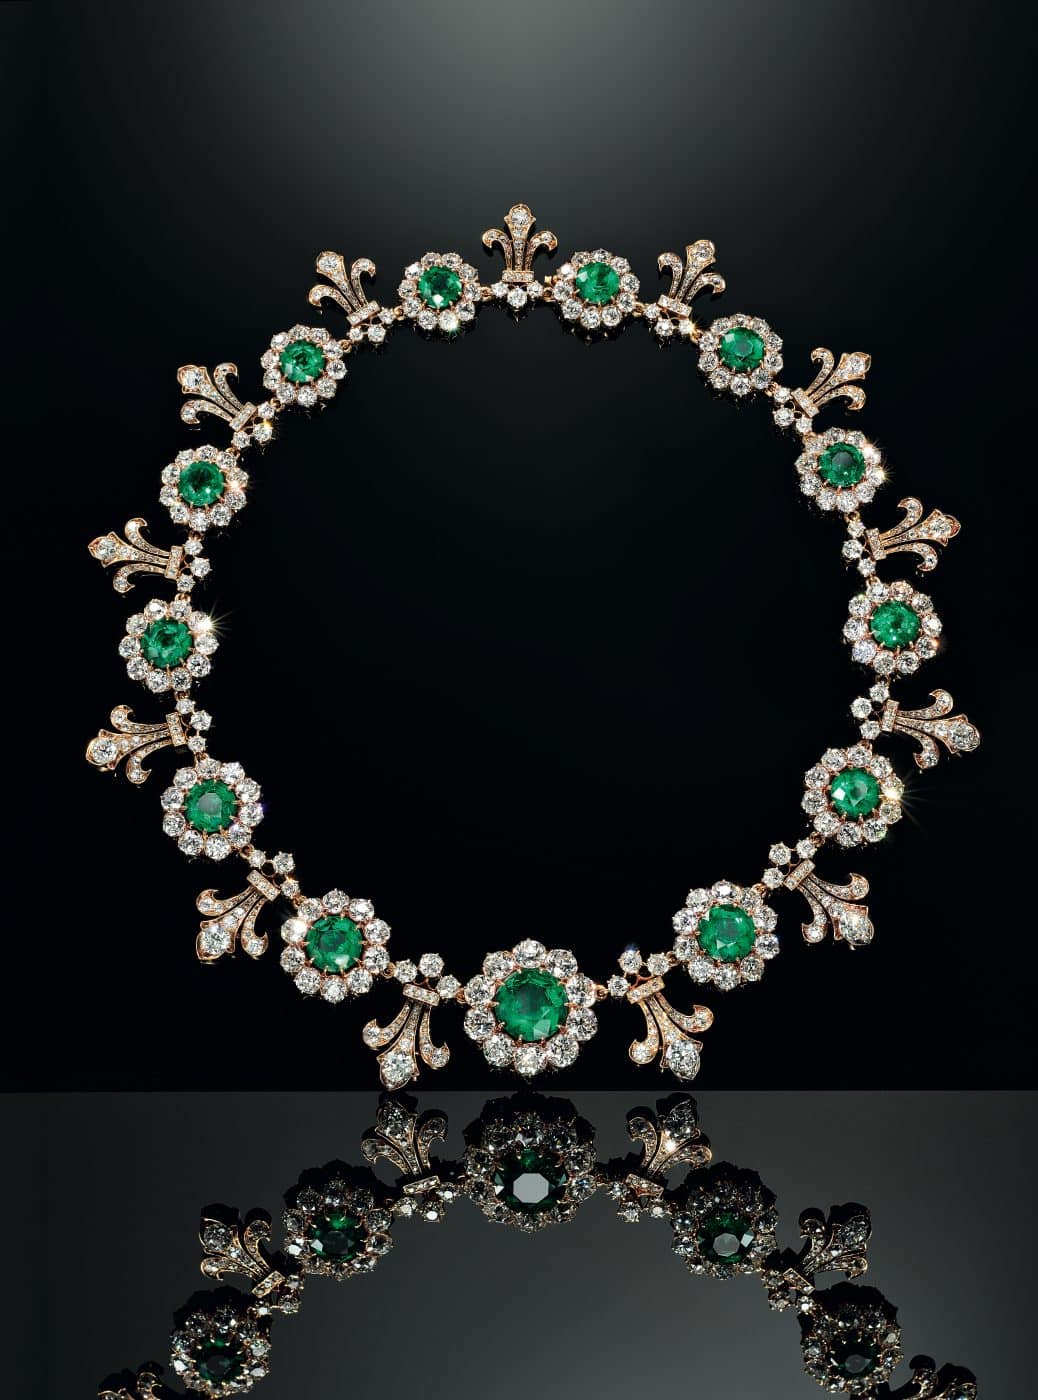 Tiffany & Co. necklace composed of gold, platinum, diamonds and emeralds